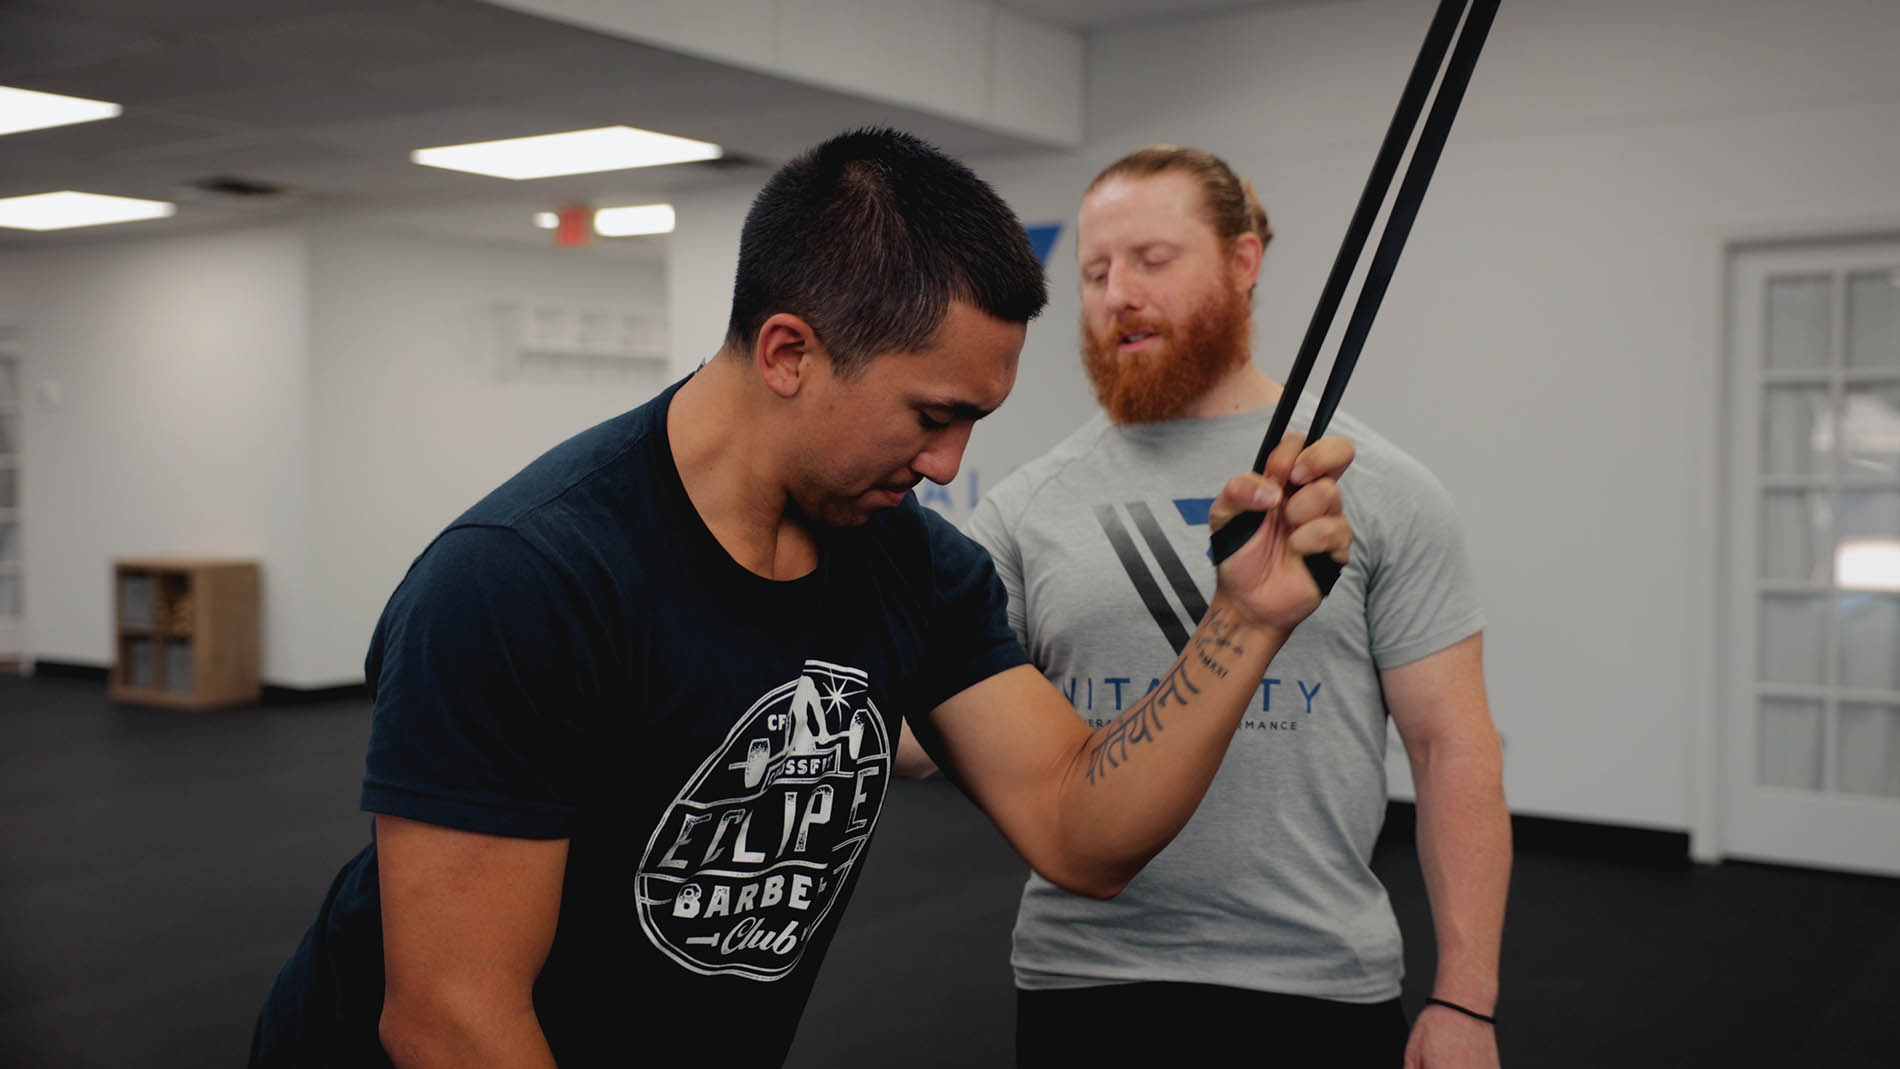 Two men in a gym, one with red hair and beard instructing the other in pelvic health exercises using a resistance band. They are focused and stand in a well-lit, spacious room.